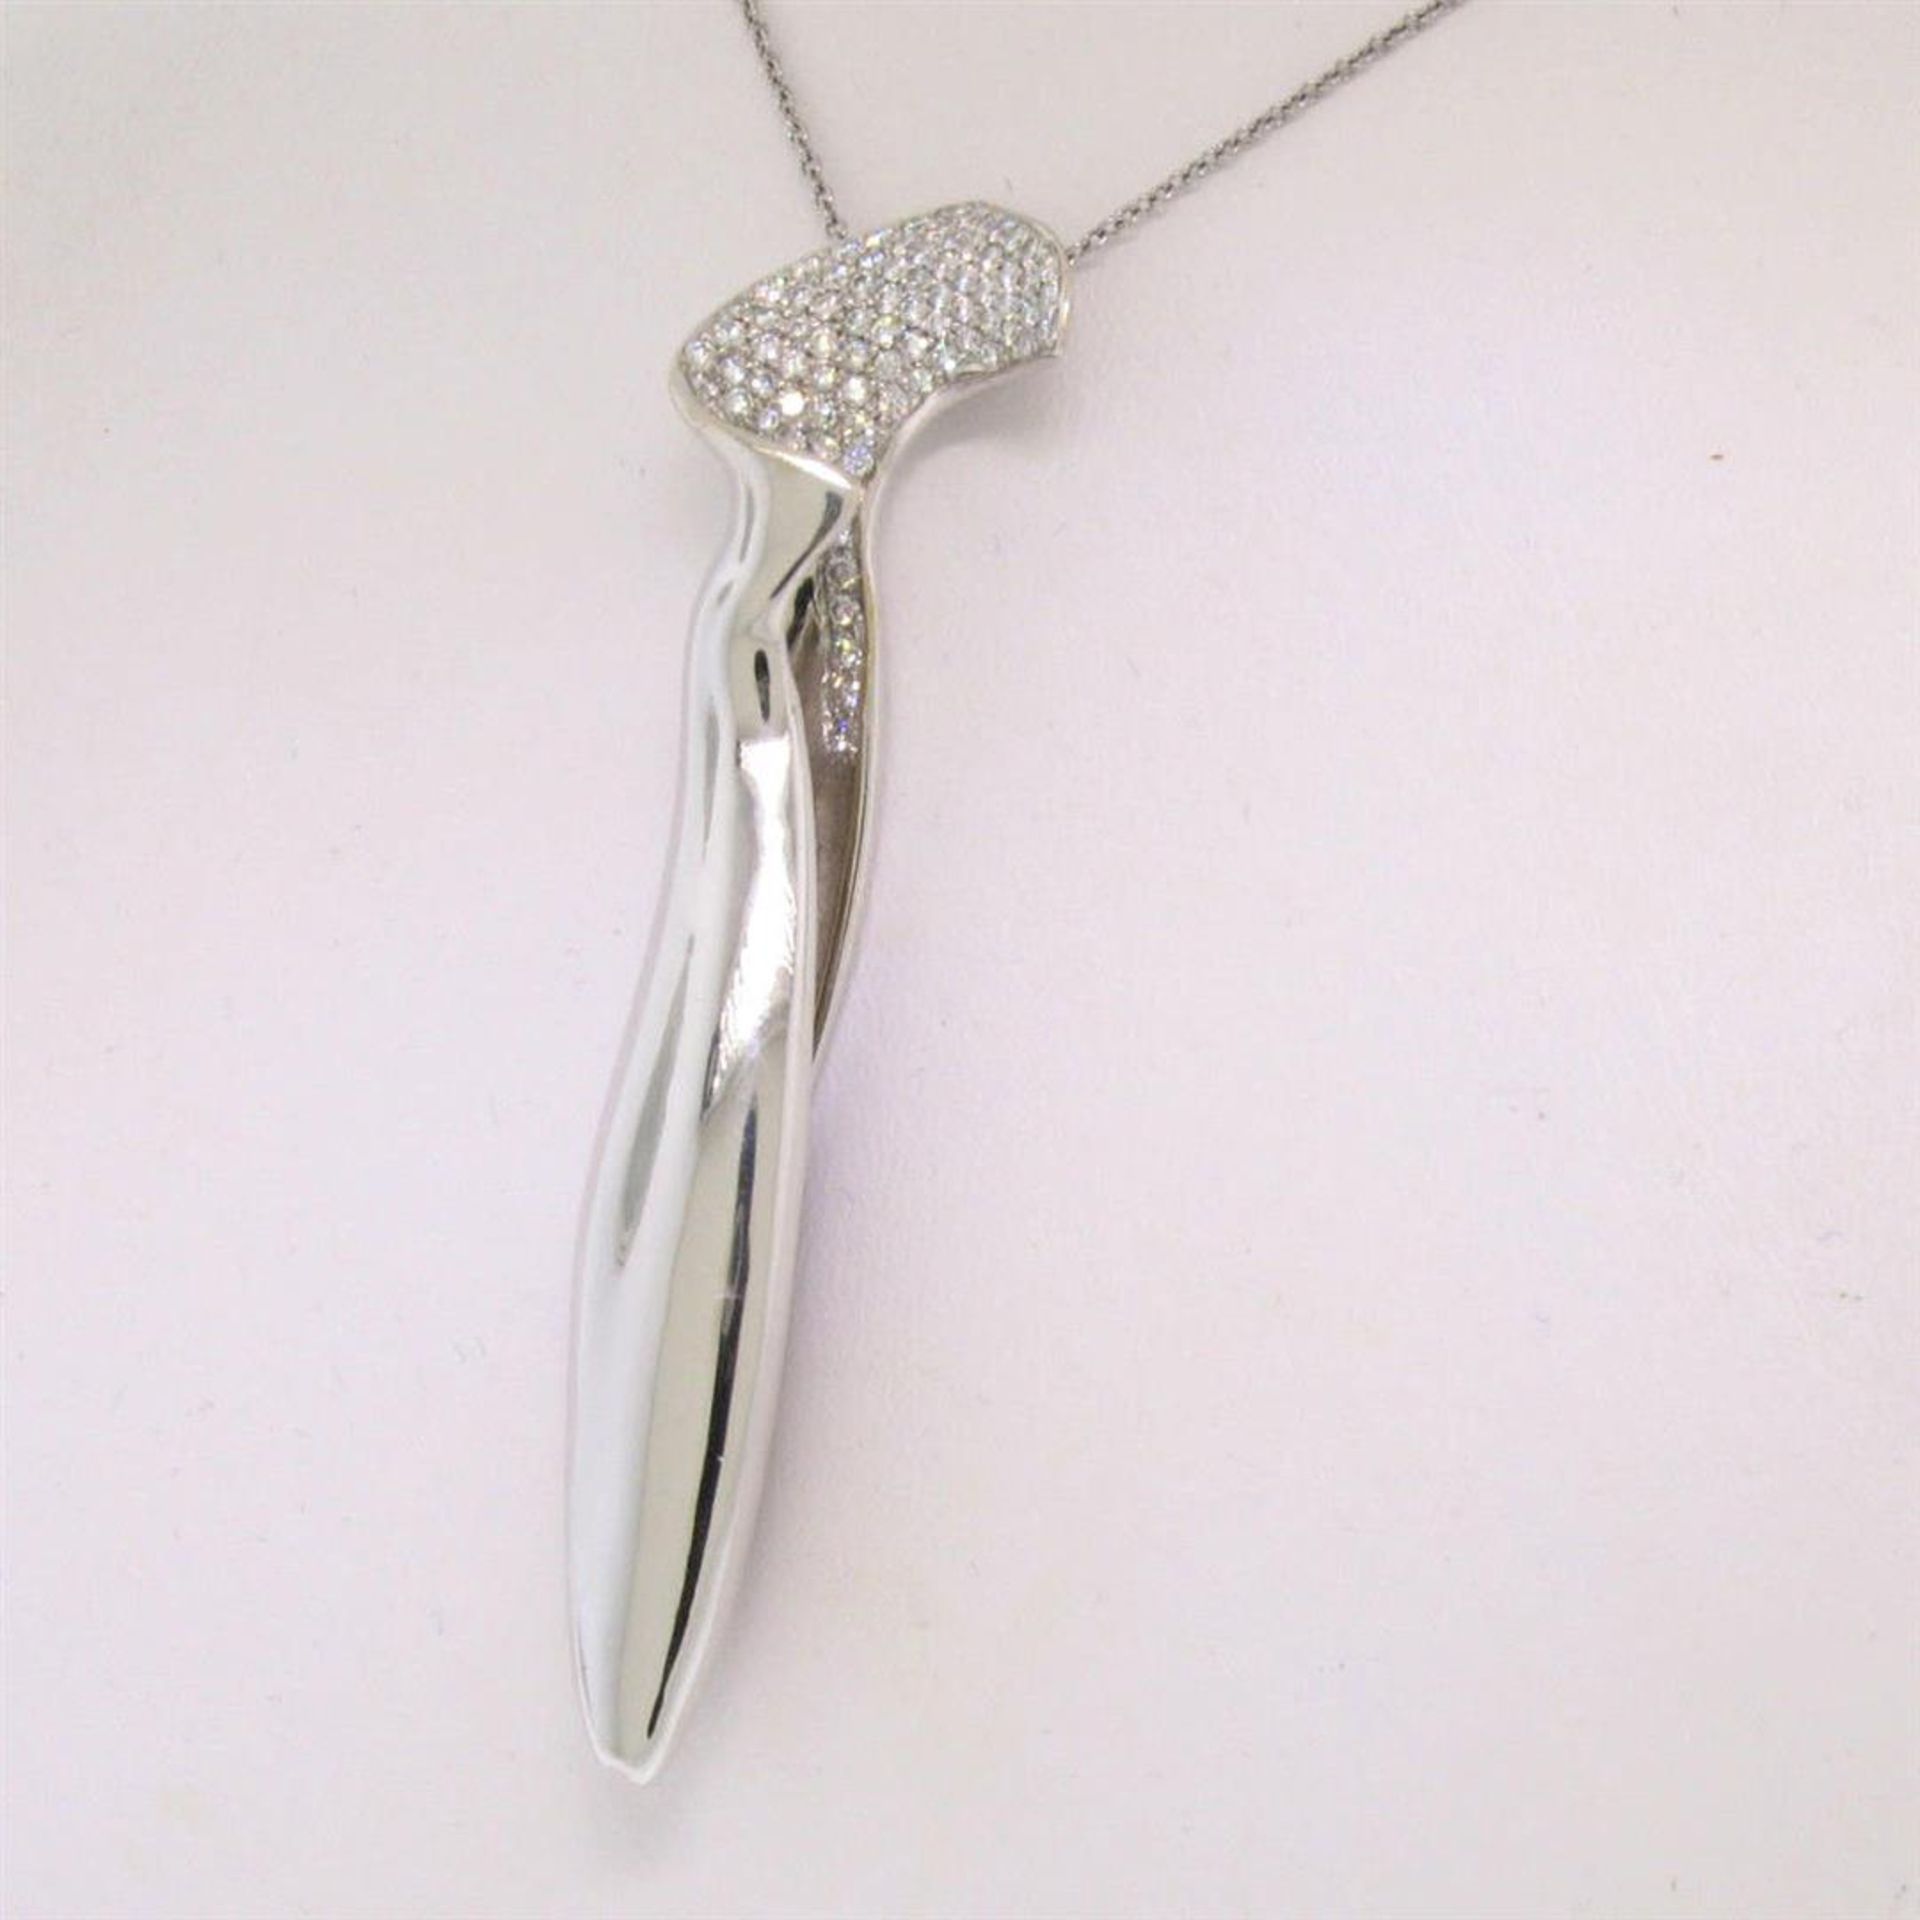 Tiffany & Co. Frank Gehry 16" 18k White Gold Orchid Diamond Pendant Necklace - Image 2 of 8